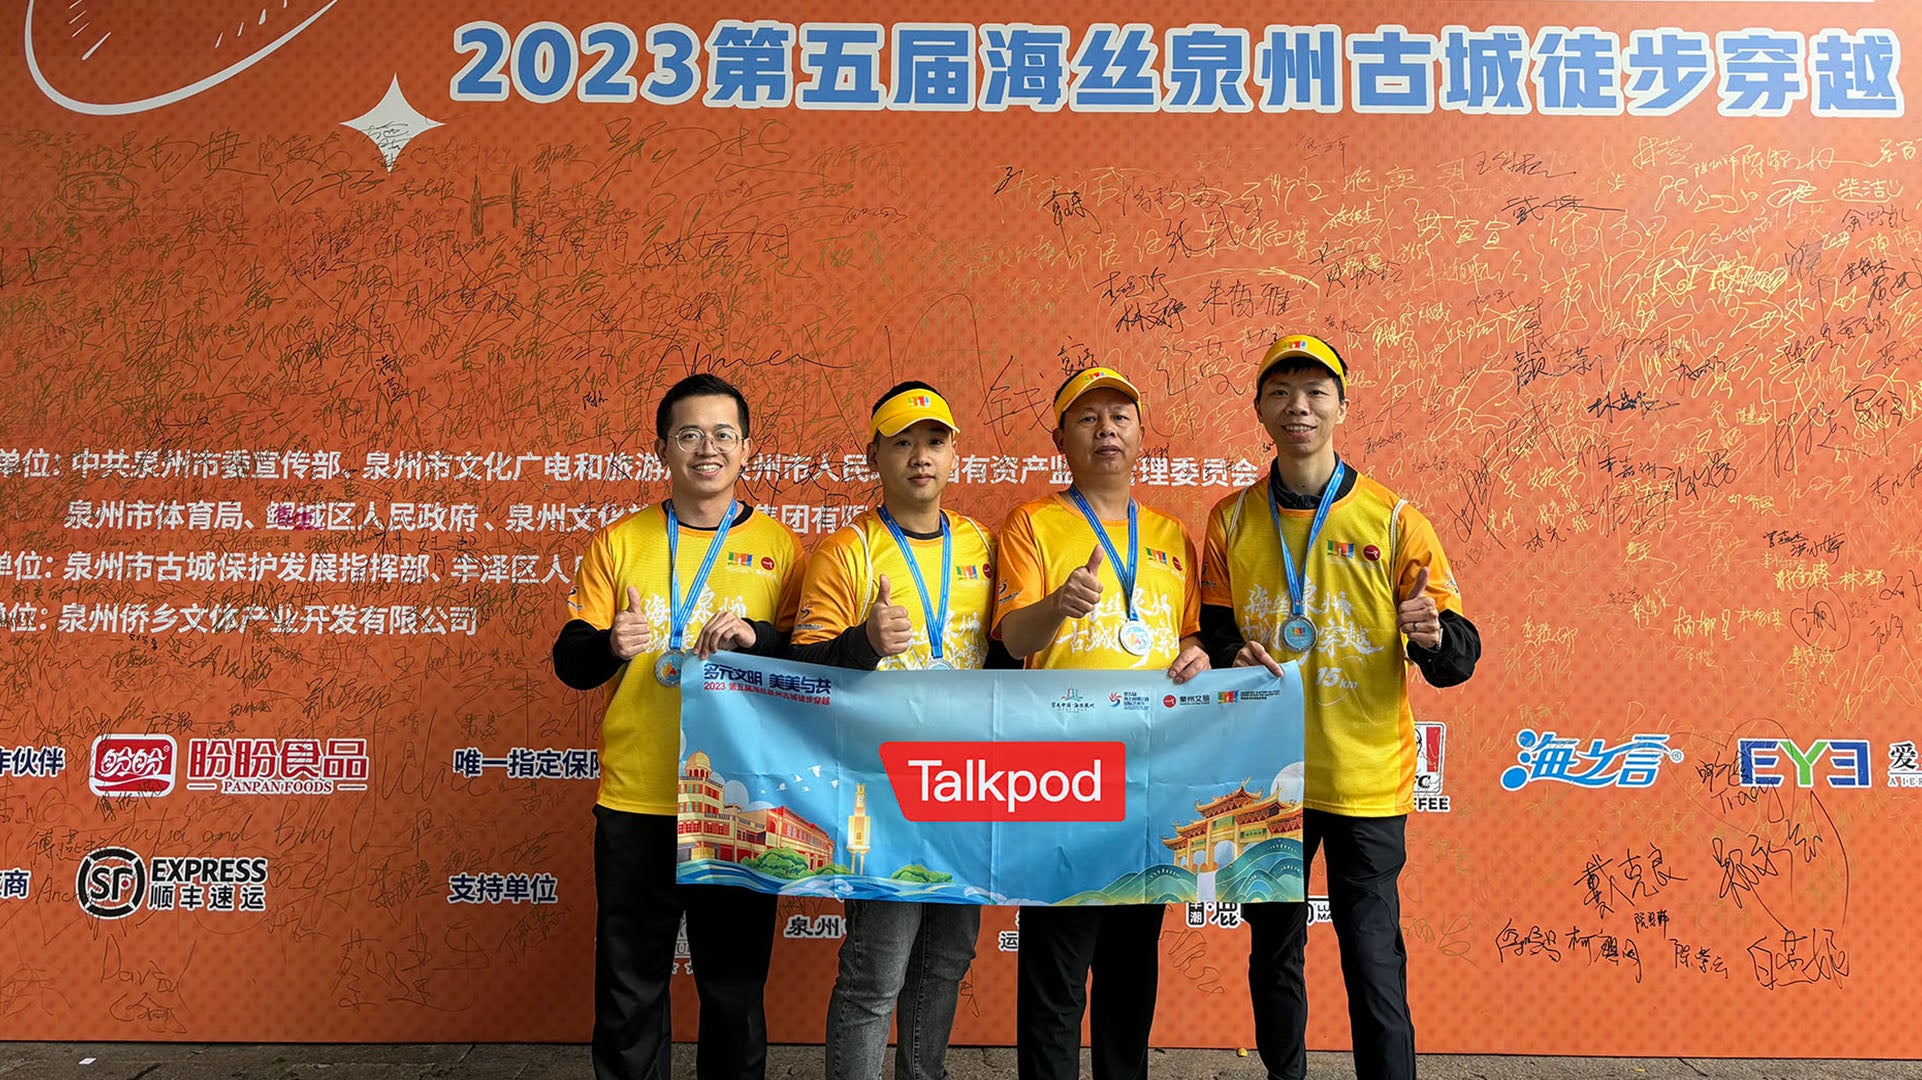 Talkpod Team Triumphs in the "Song and Yuan China, Maritime Silk Road Quanzhou, Ancient City Hike" Event